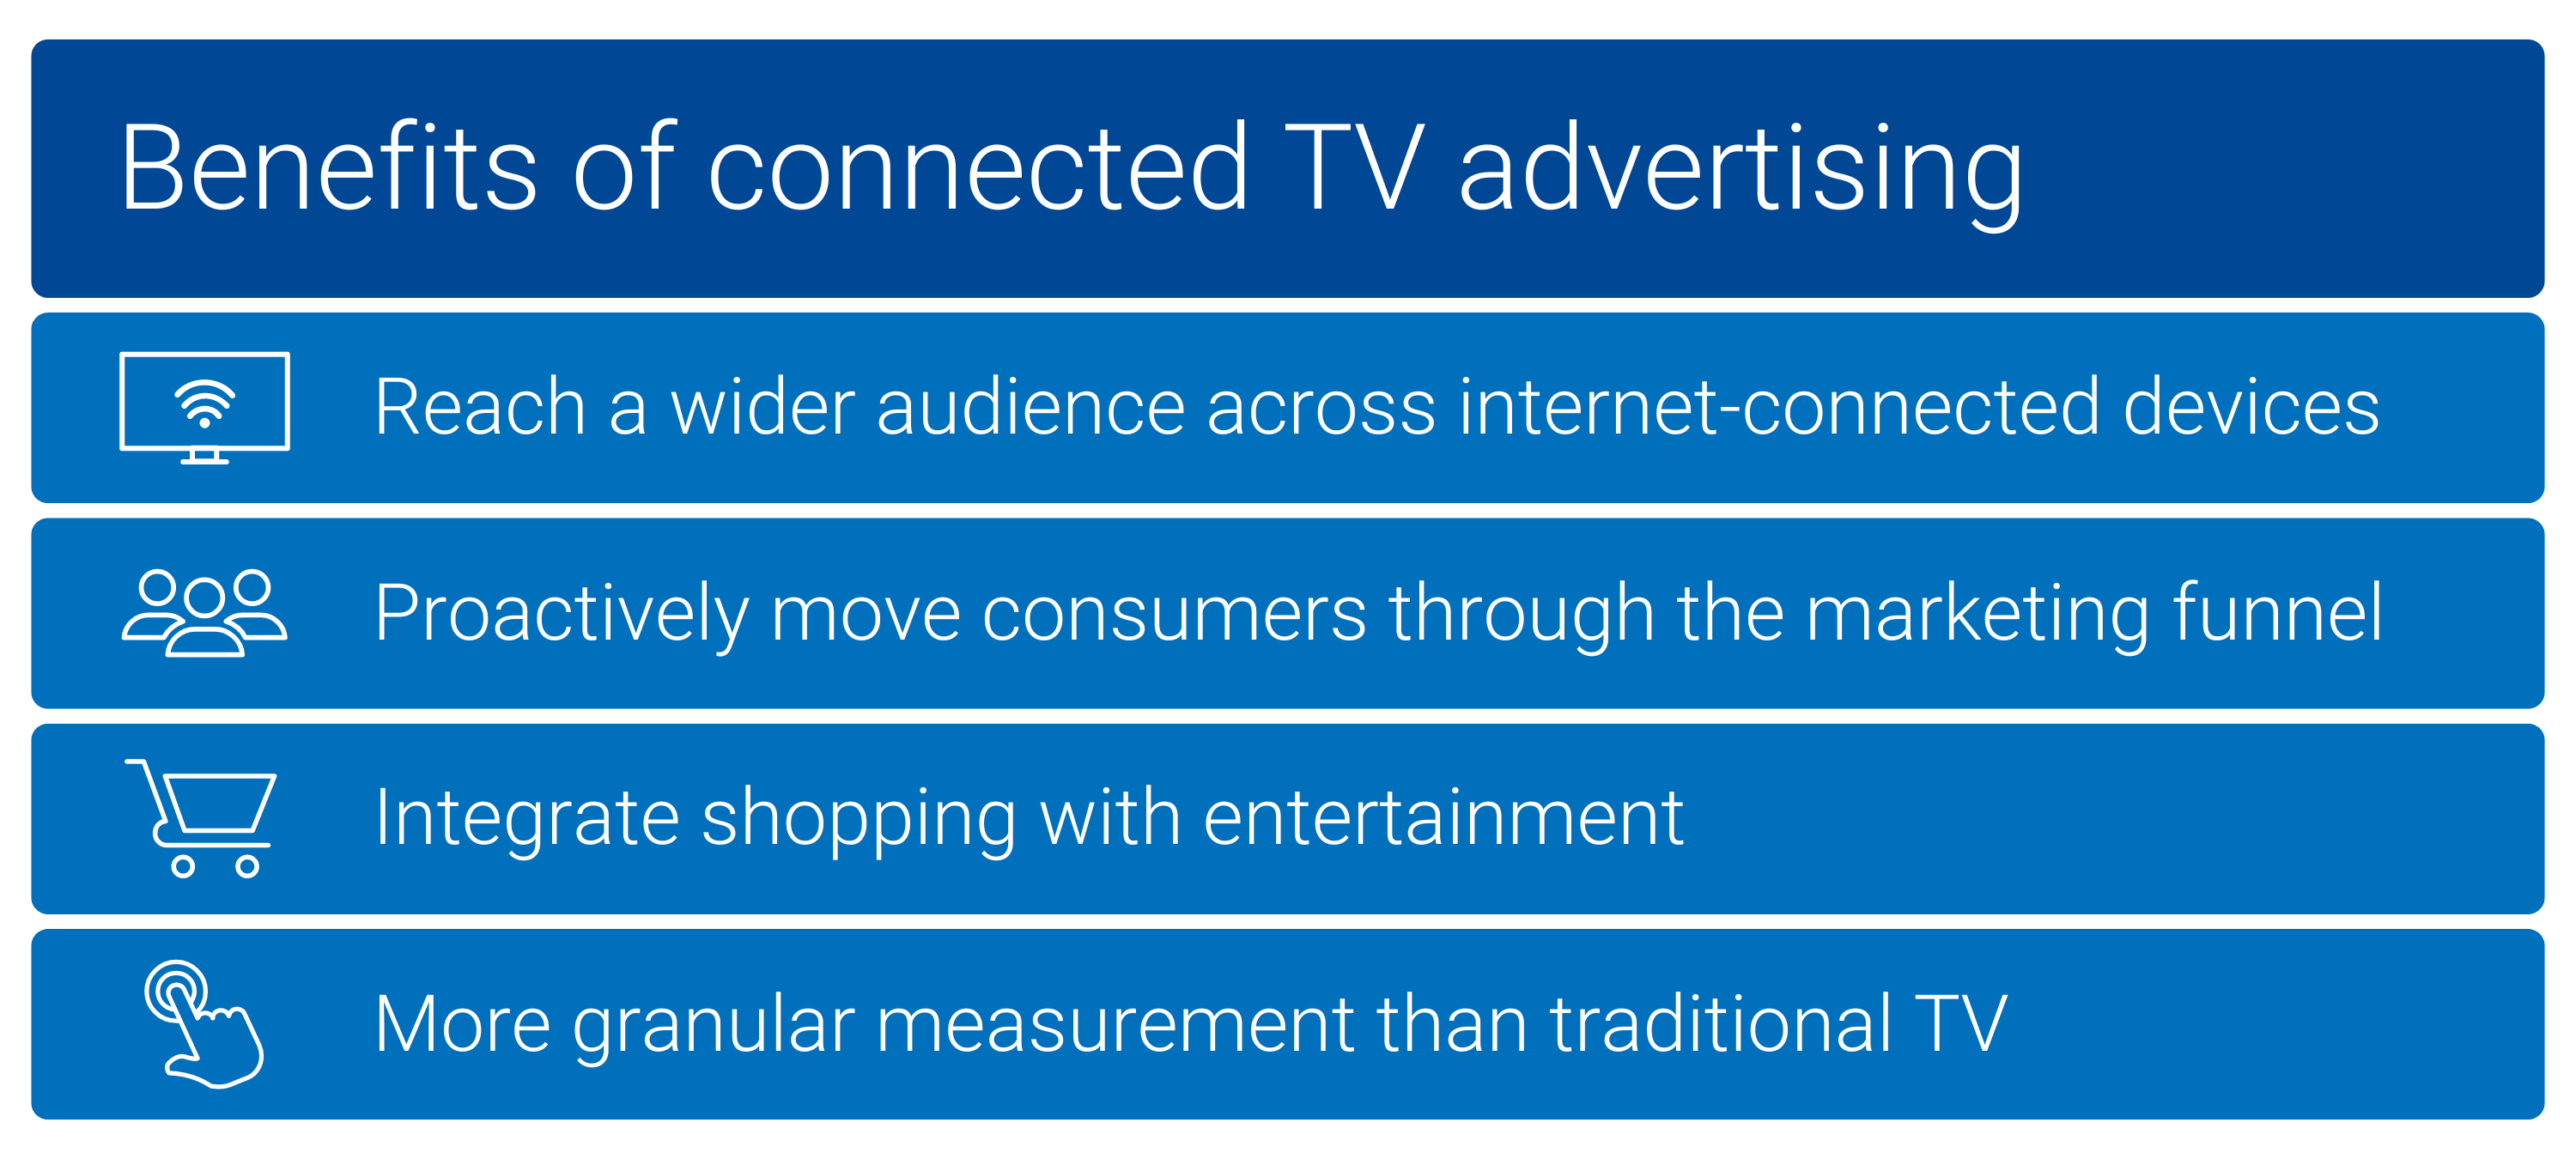 the benefits of connected TV (CTV) advertising